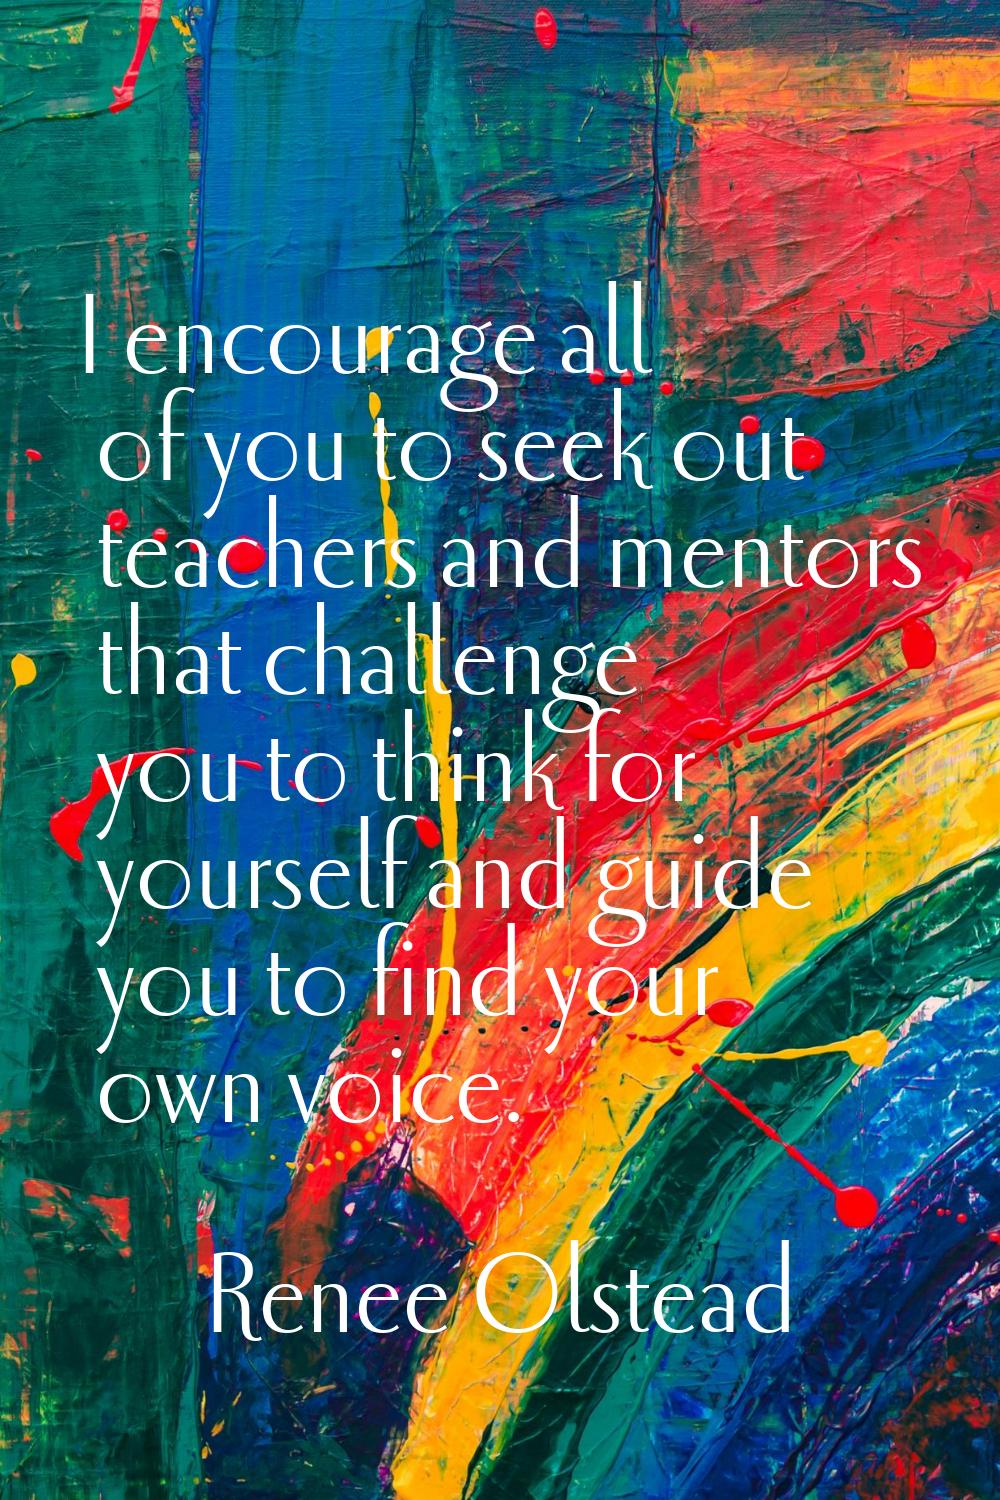 I encourage all of you to seek out teachers and mentors that challenge you to think for yourself an